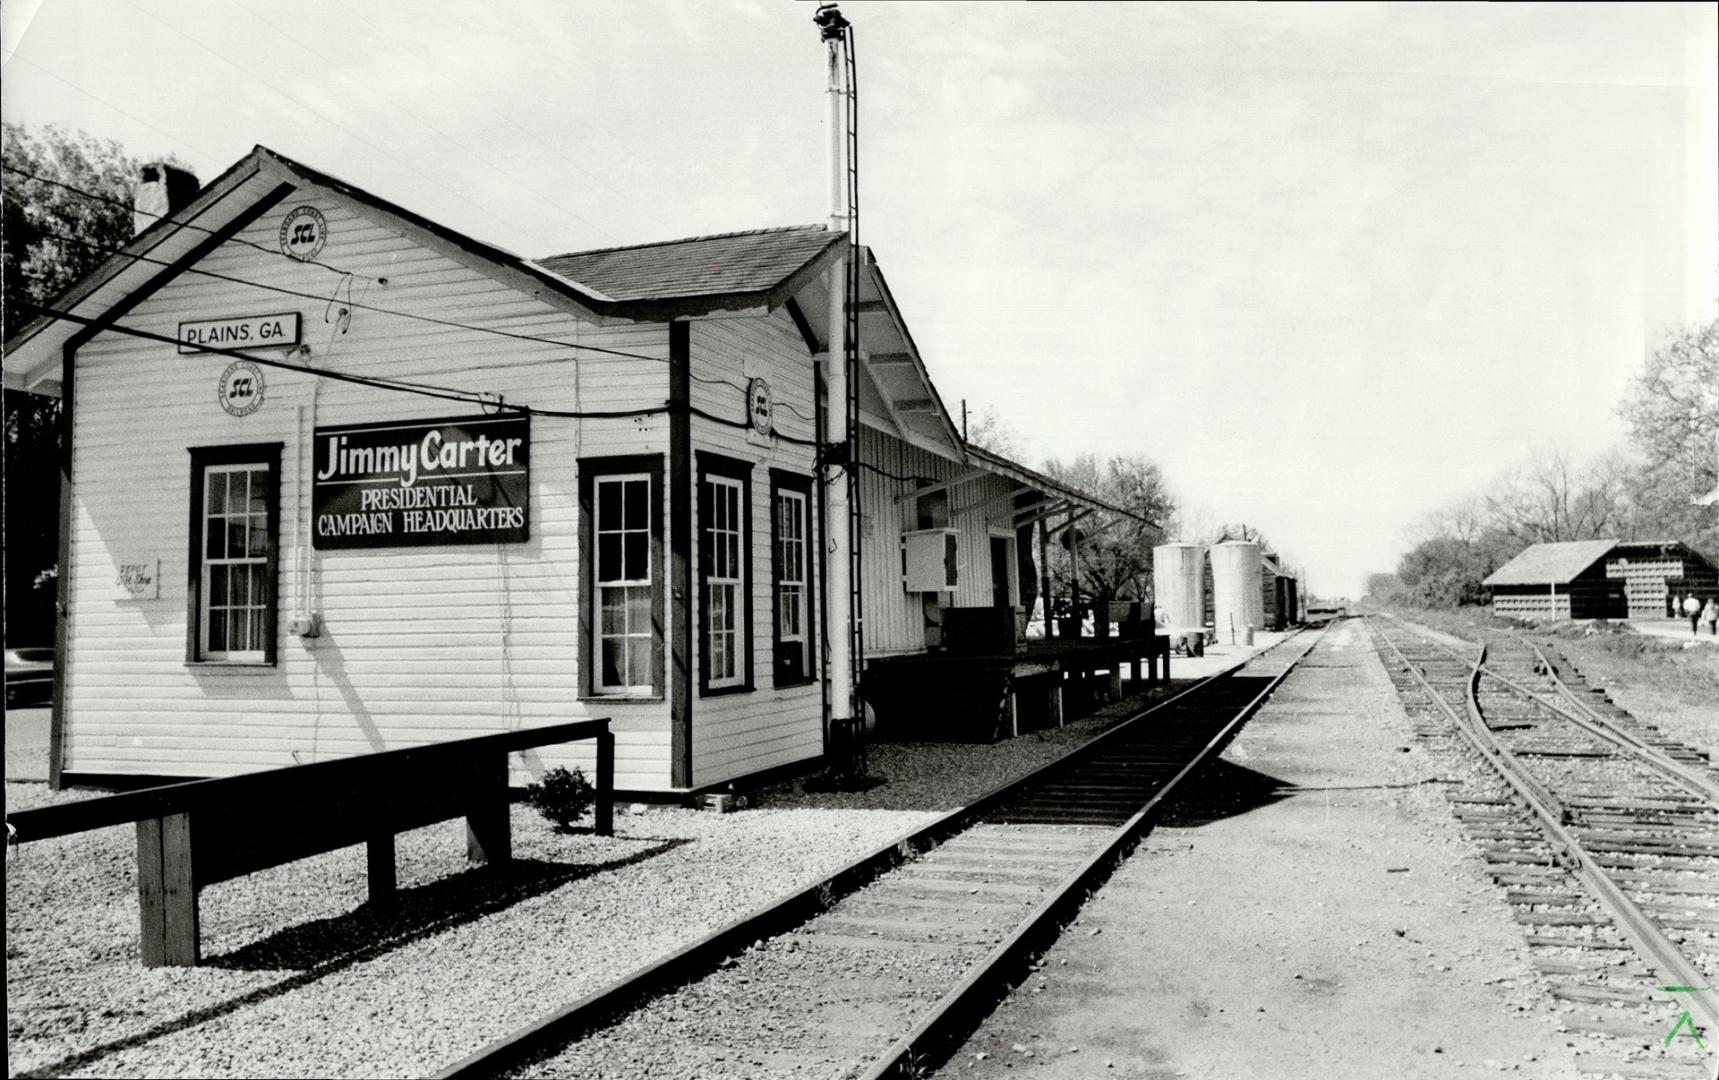 As it was: The railway depot that was campaign headquarters is a good place to begin your tour of Plains, Ga